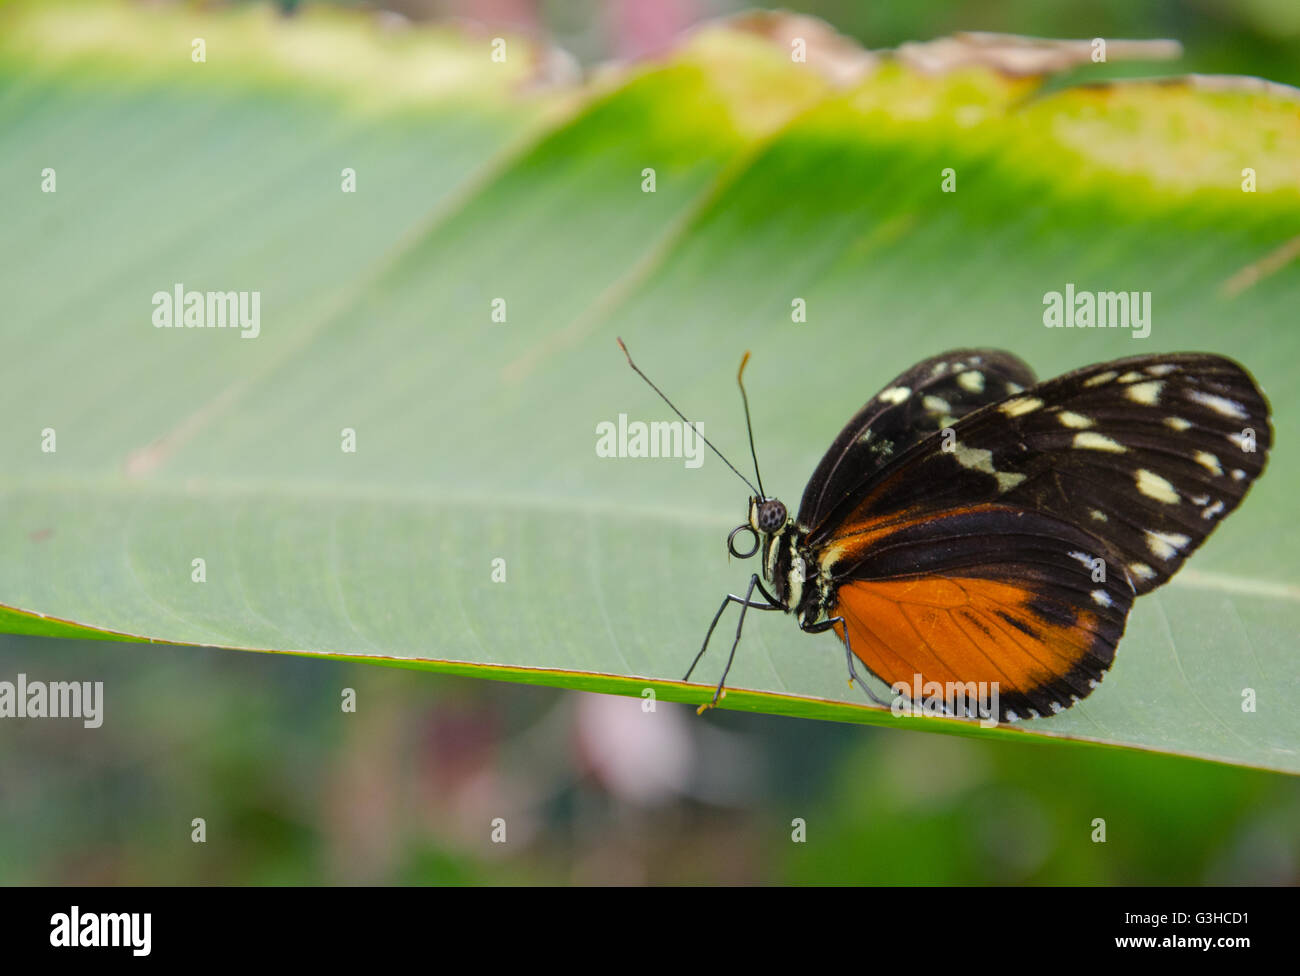 Heliconius hecale butterfly sitting on a leaf Banque D'Images